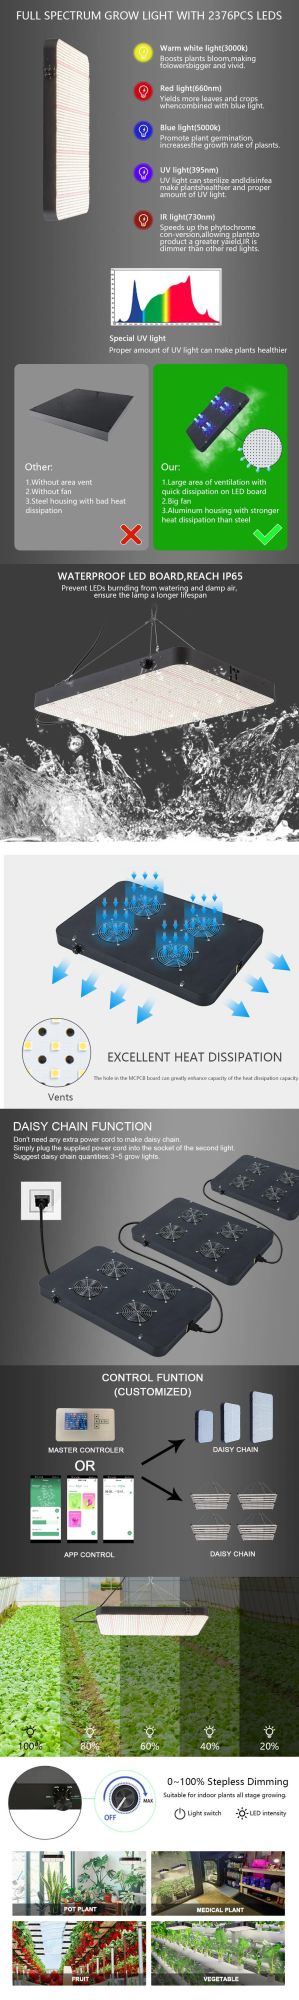 Waterproof 600W 2376PCS LEDs Dimmable Full Spectrum Daisy Chain and Quiet Cooling Fan LED Growing Lights for Gardening Plants, Indoor Plants (FCC CE RoHS)